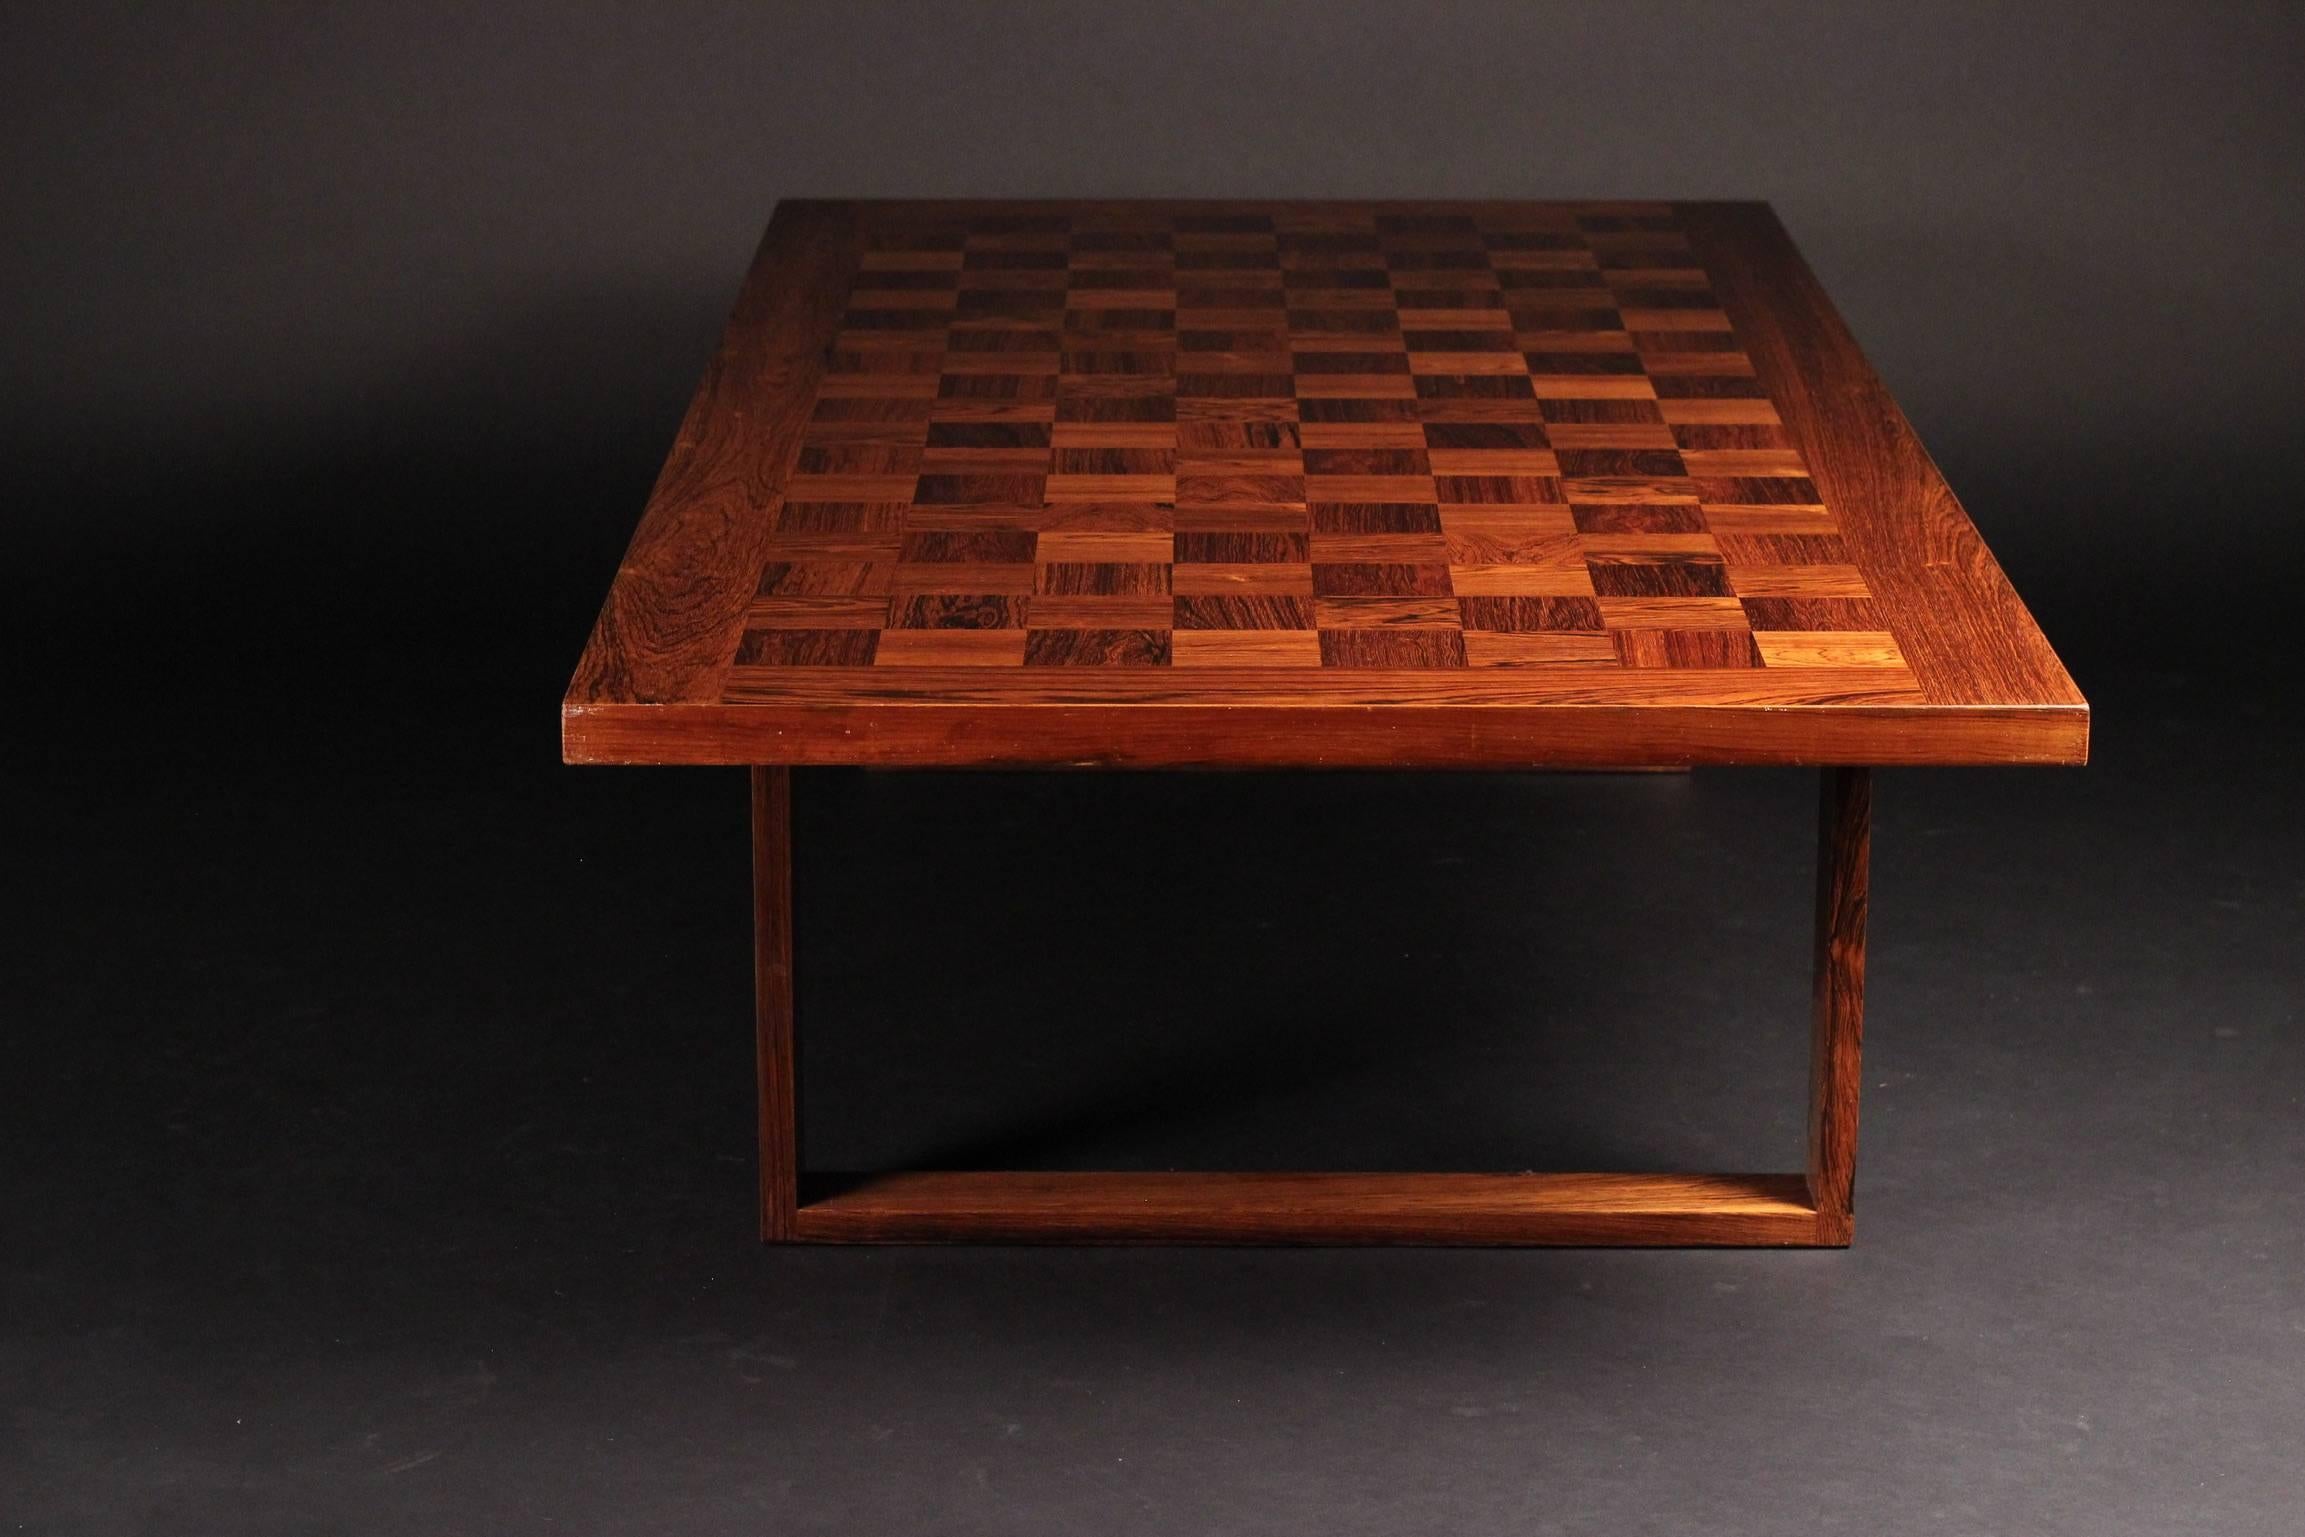 Sometimes called the Chess Boggie Woogie table, this Rosewood Parquet table sits on two sled legs and is refinished by our experienced restorers. This is the largest of three we currently have restored and for sale on 1stdibs.